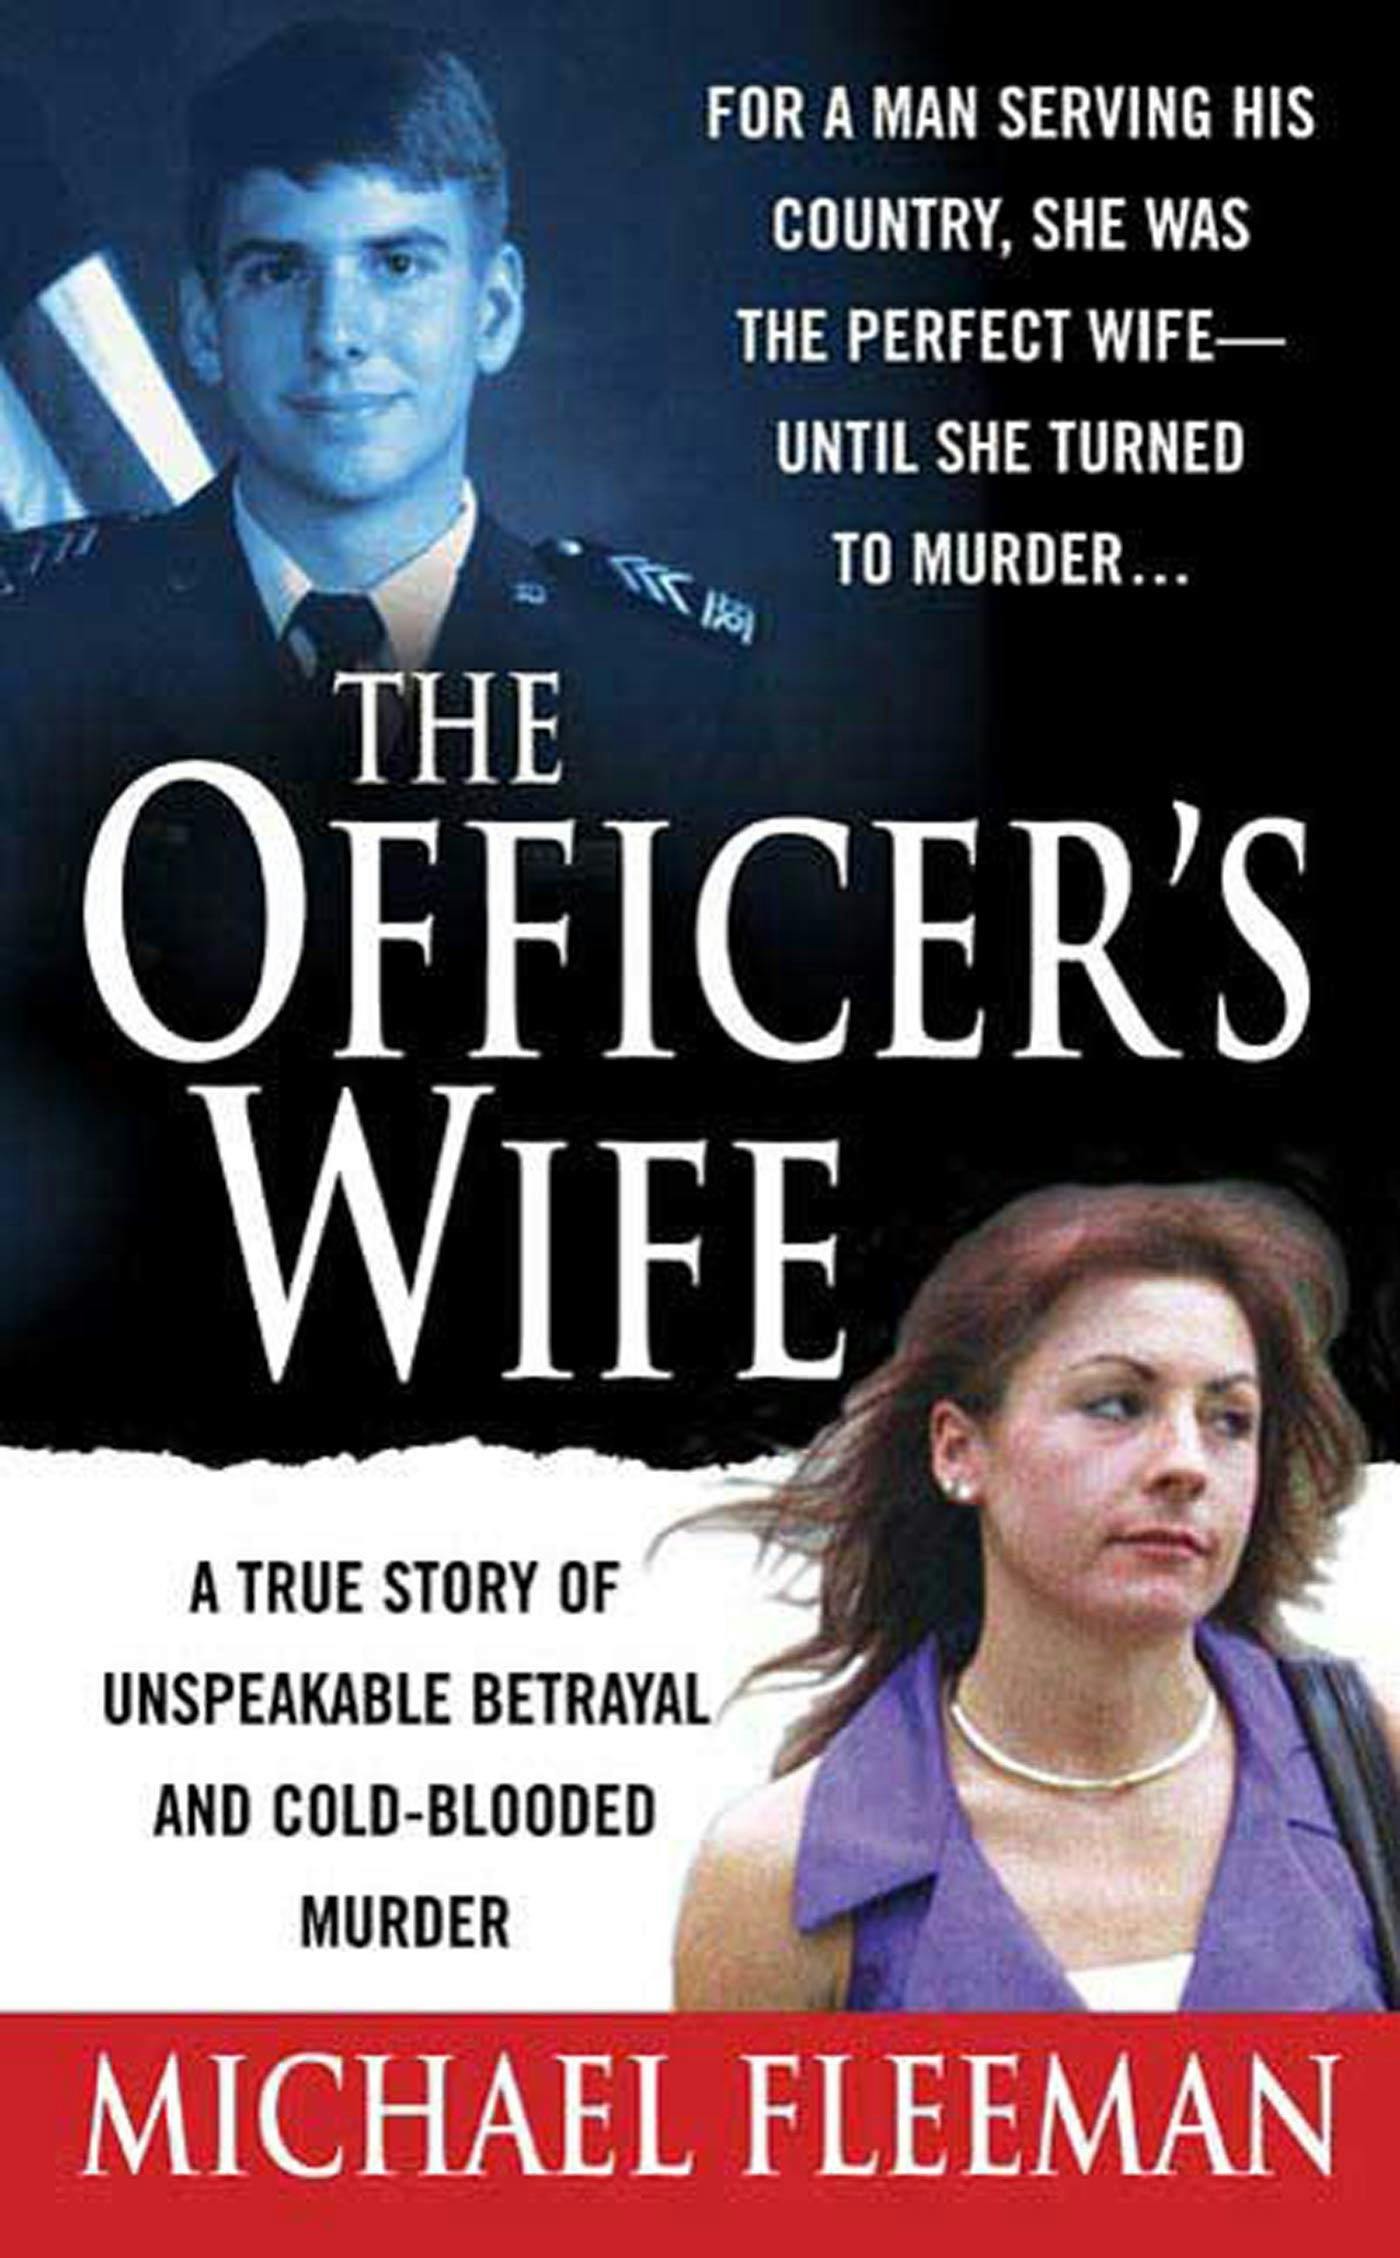 The Officers Wife image pic